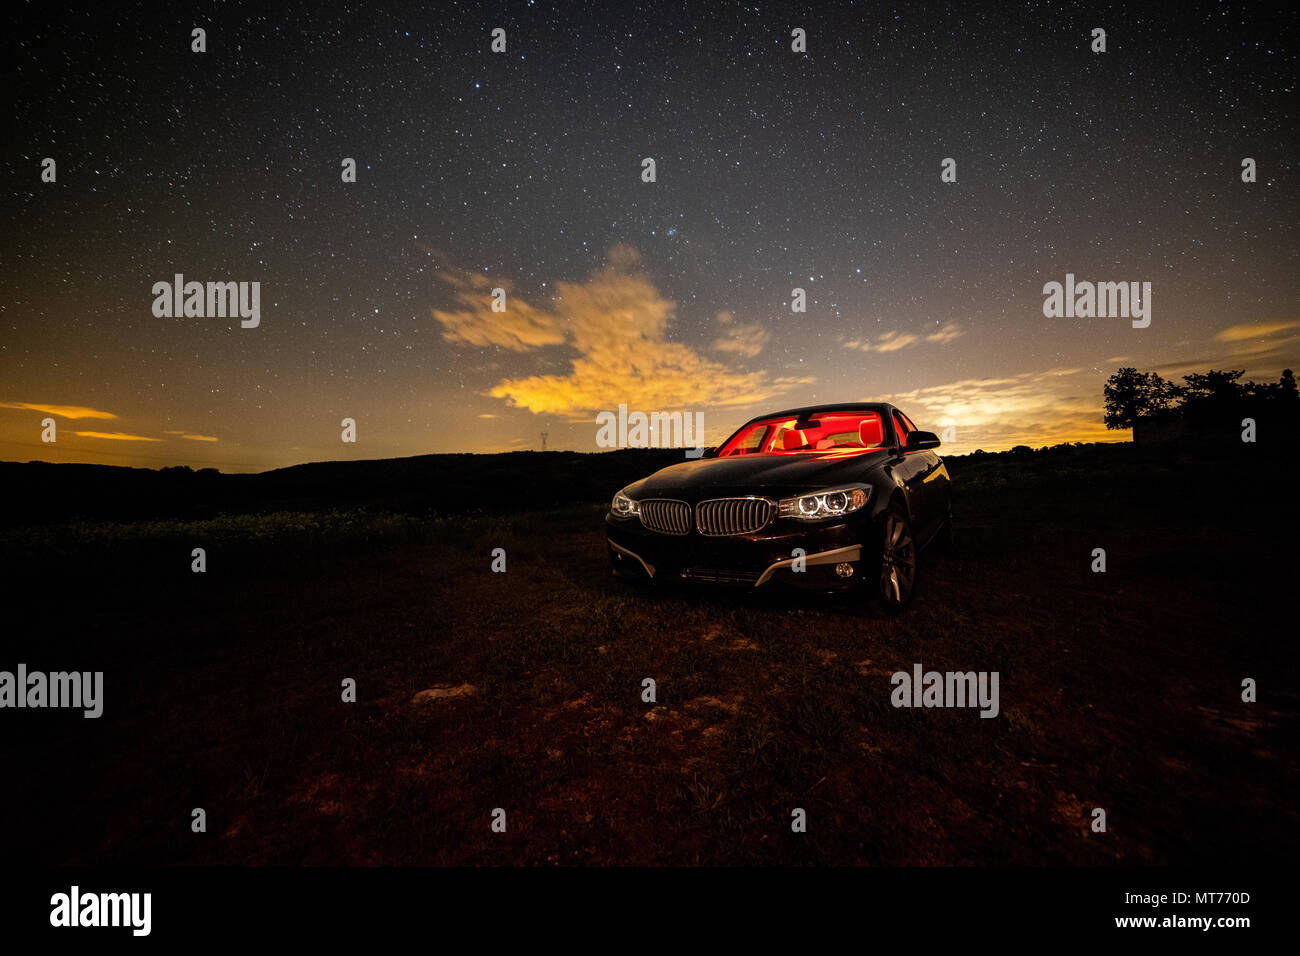 Long Night Photography Of A Car With Red Color Illuminated